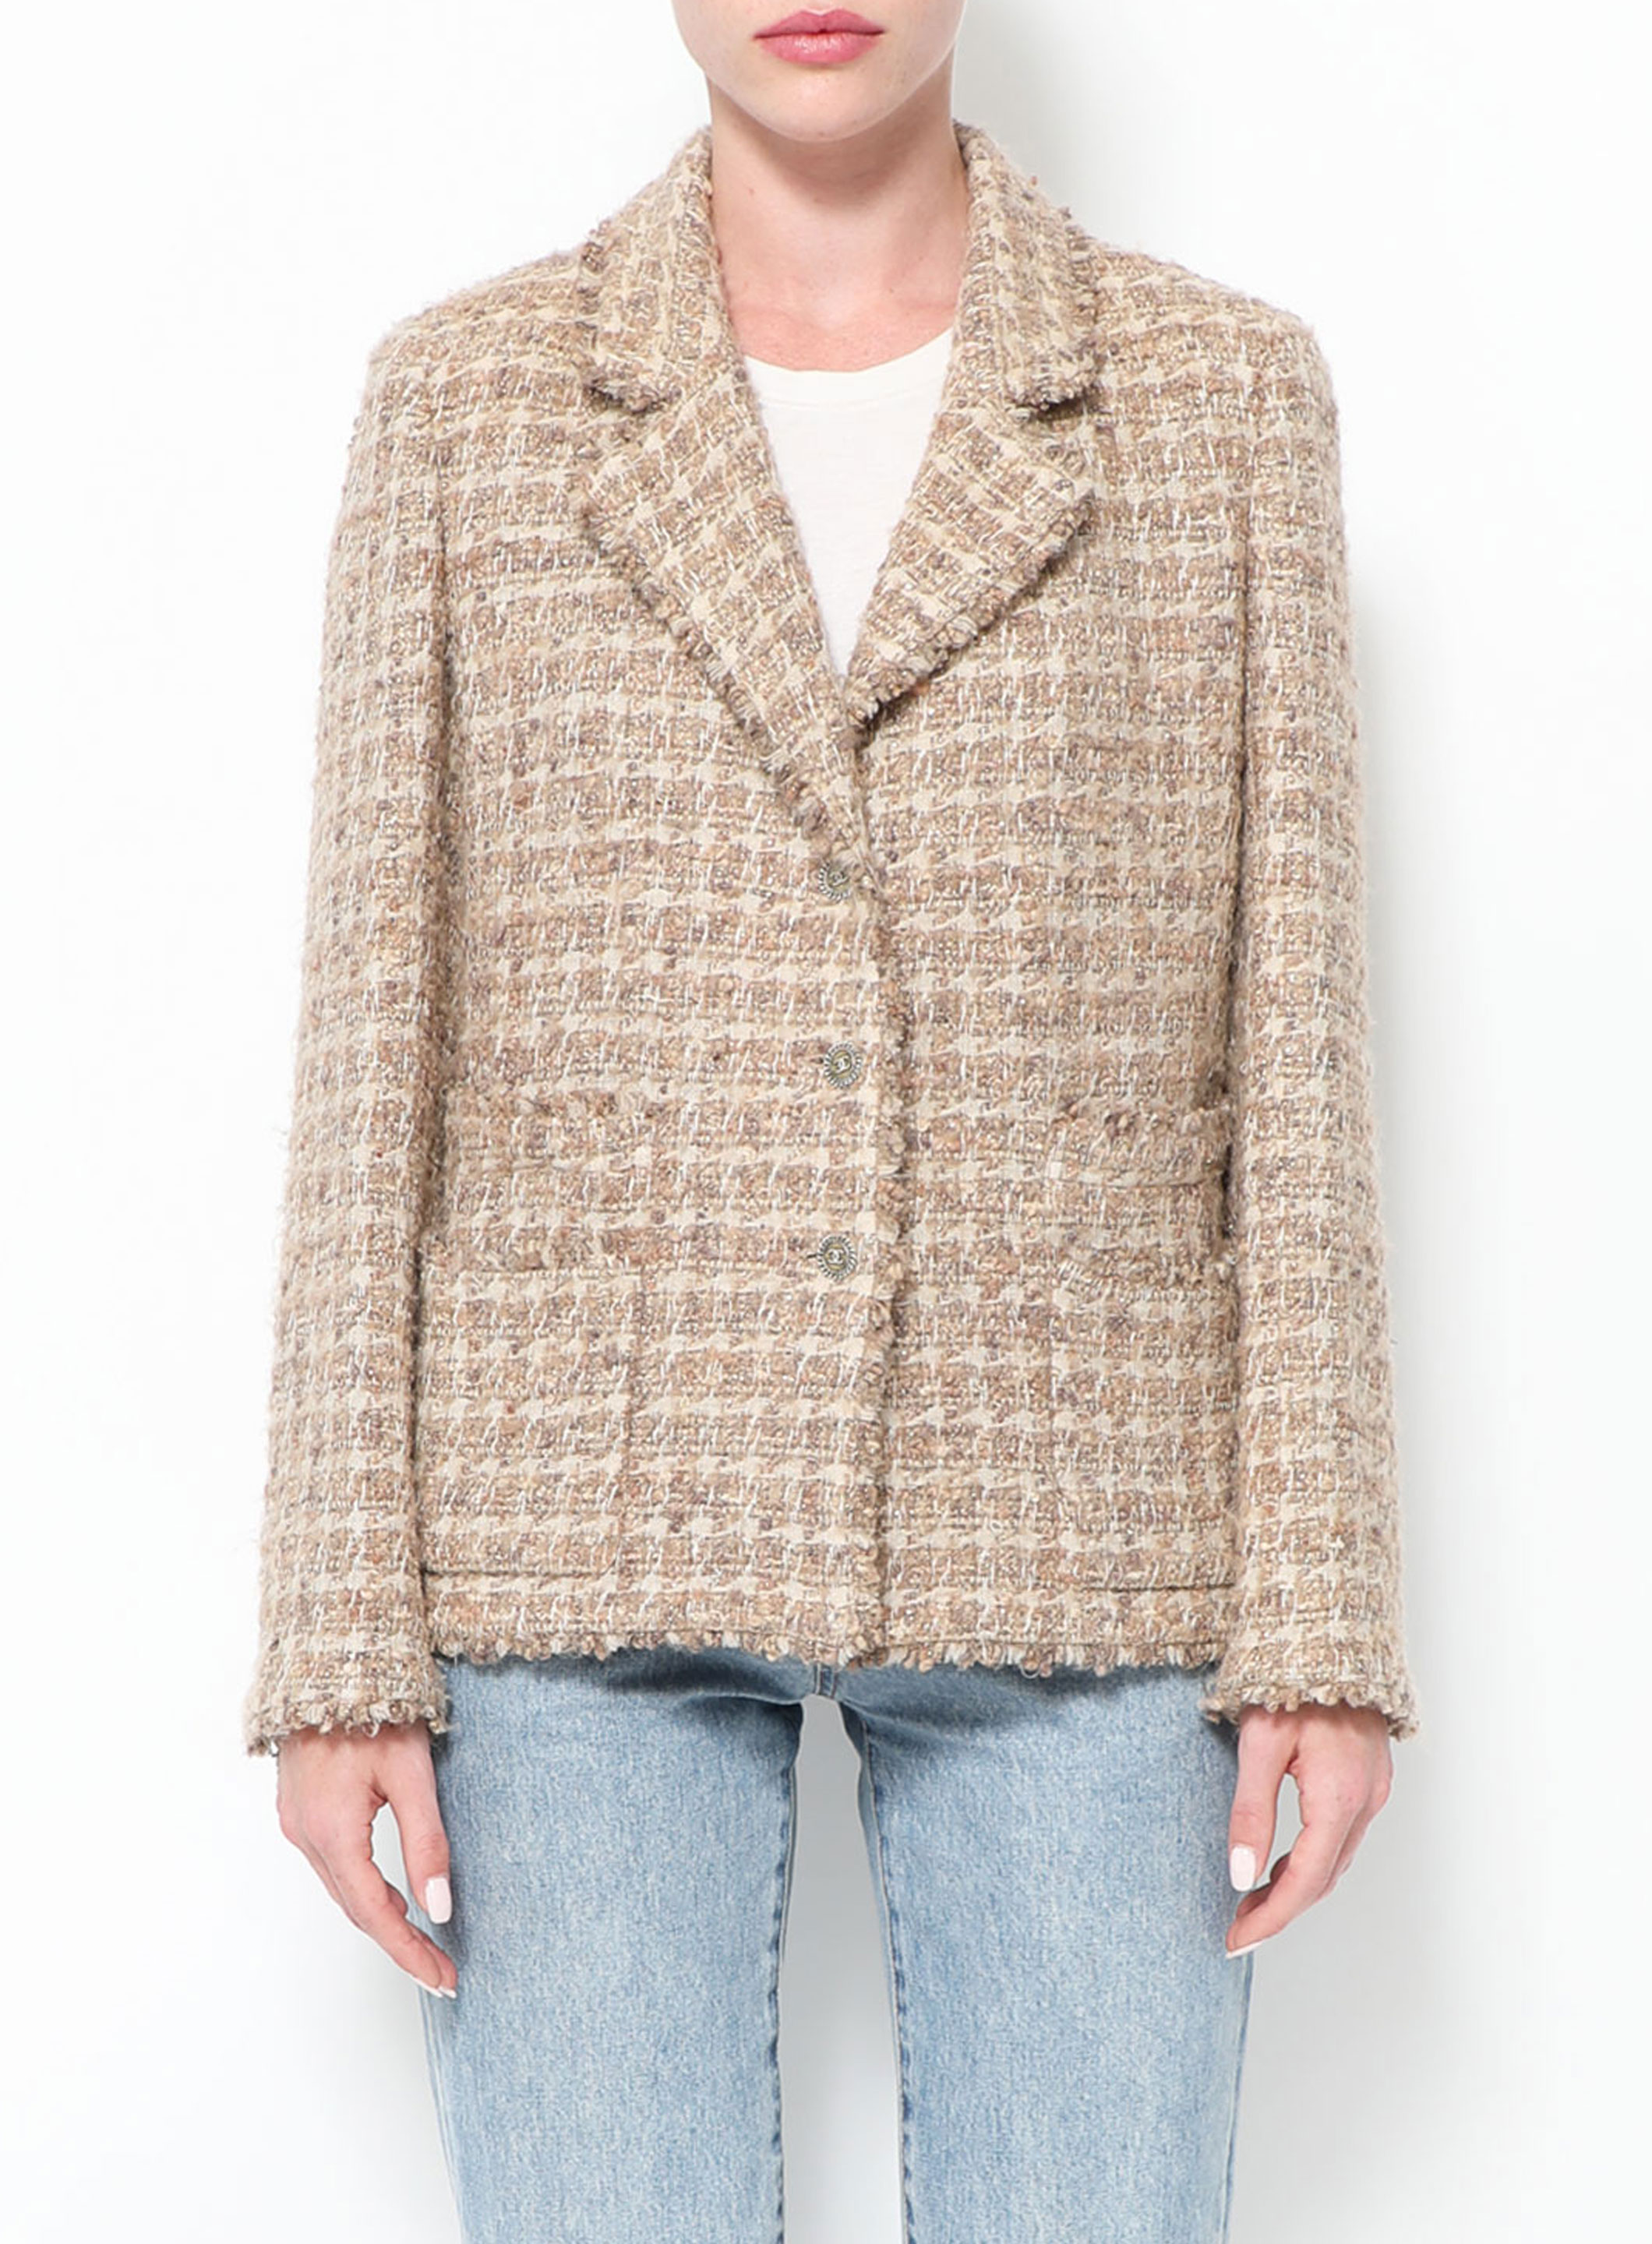 LOUIS VUITTON Silk Tweed Jacket 40 Authentic Women Used from Japan